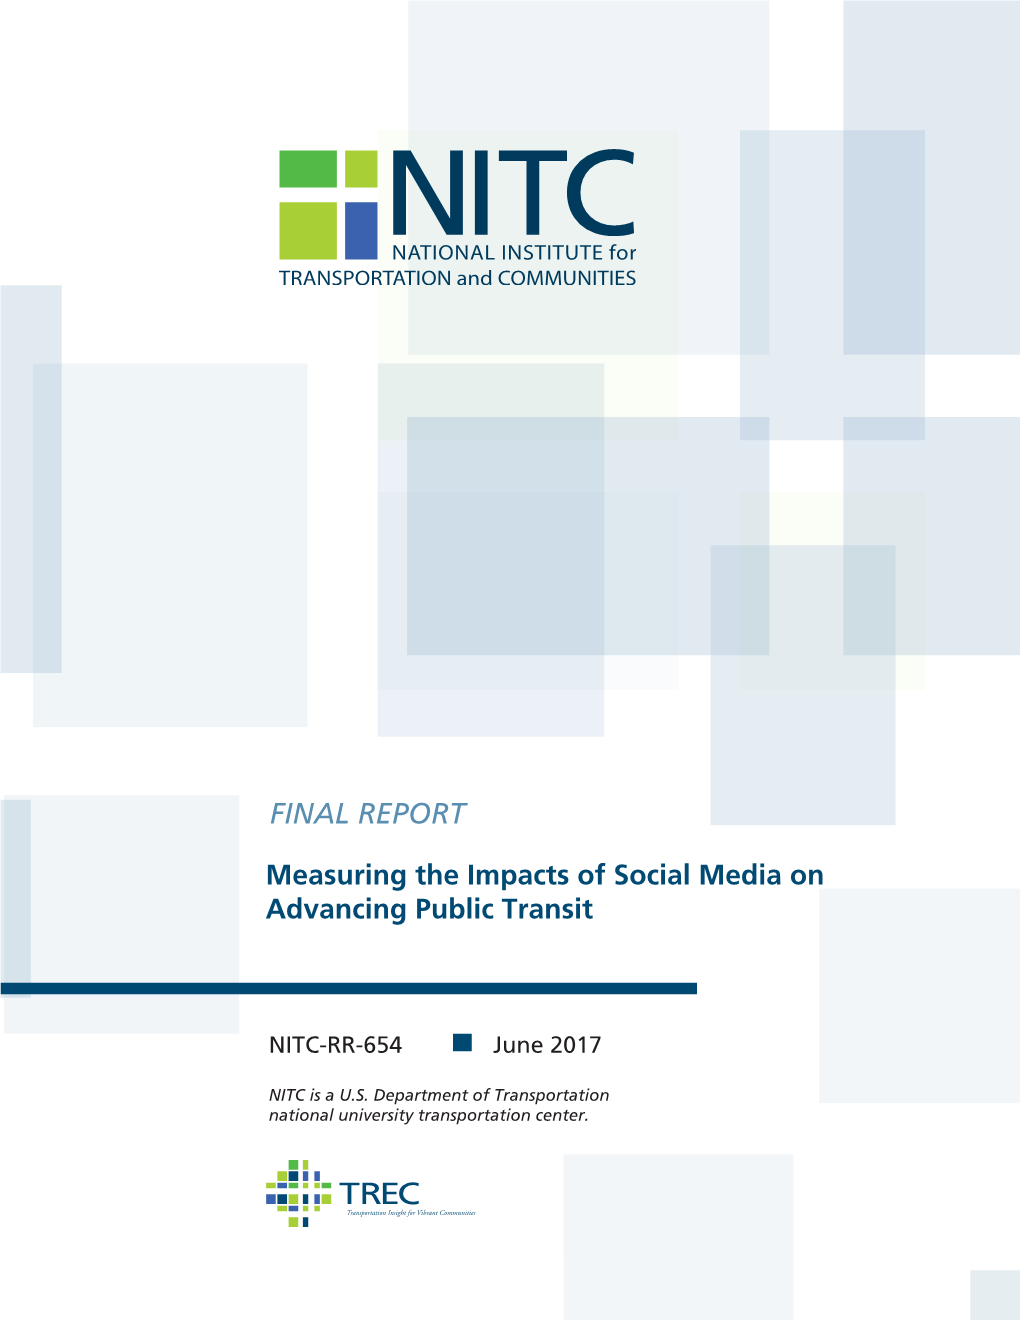 Measuring the Impacts of Social Media on Advancing Public Transit